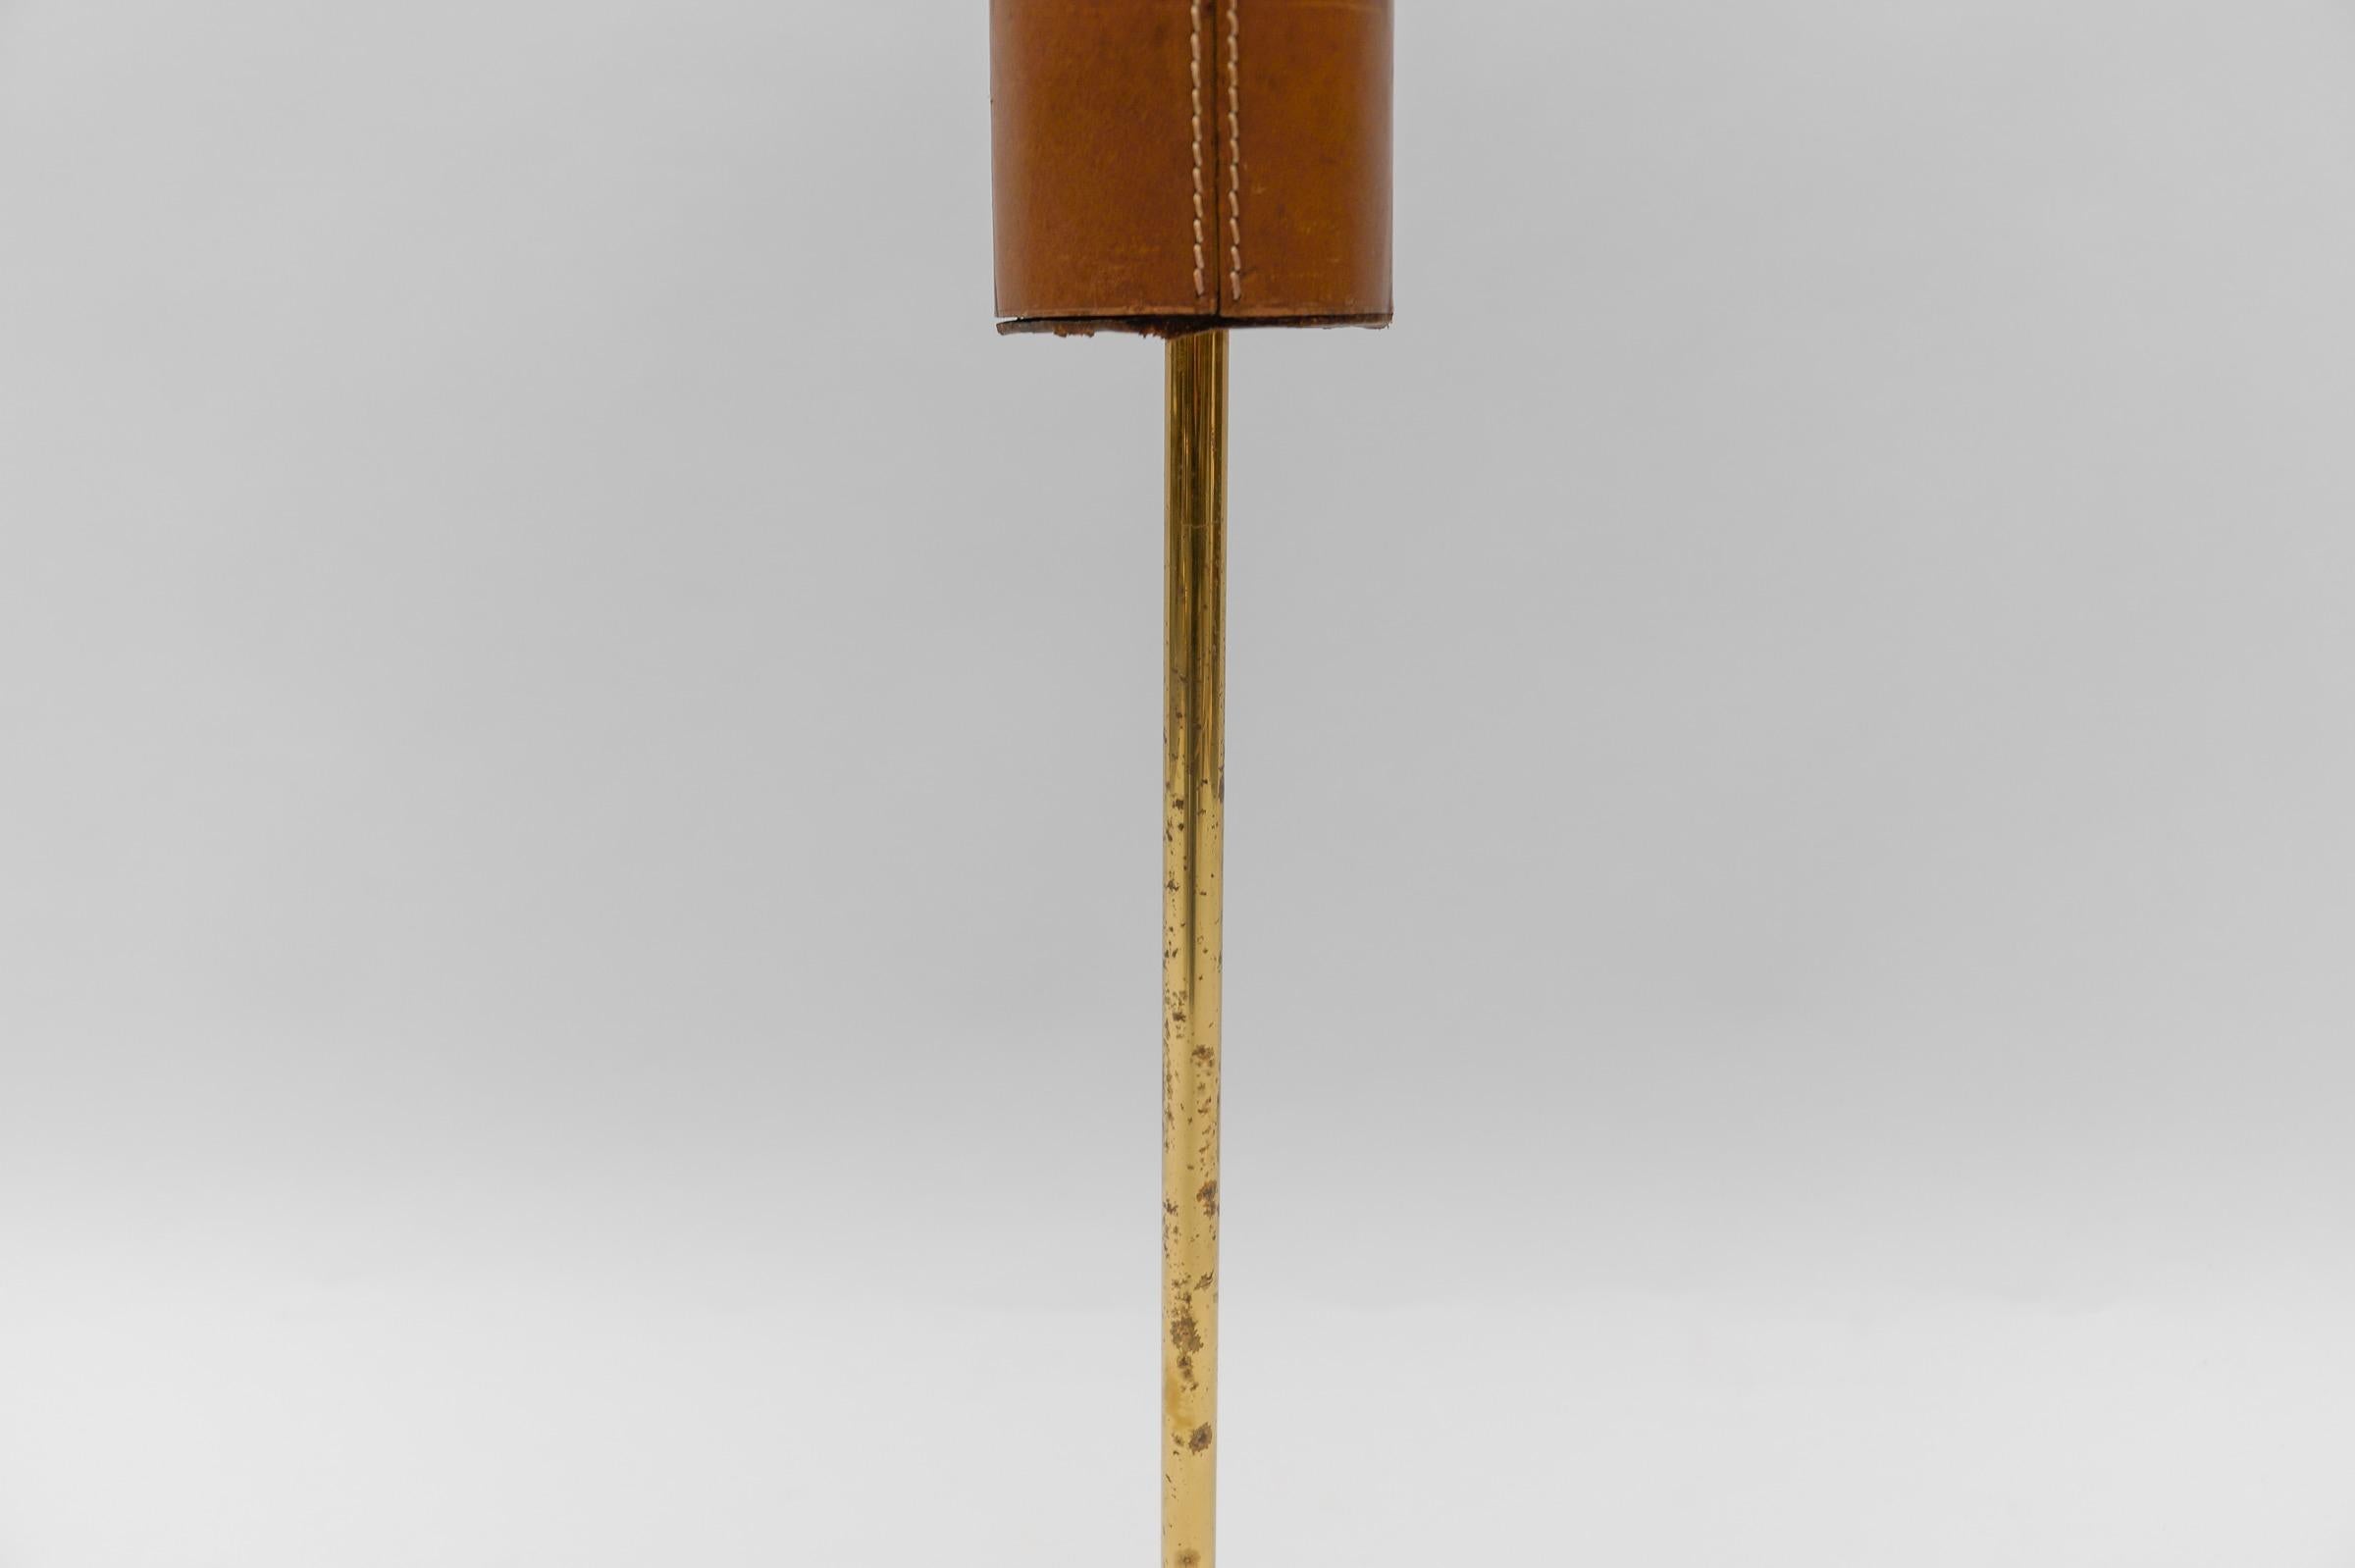 Portable Ashtray Stand in the Manner of Jacques Adnet, Brass and Leather, 1950s For Sale 2